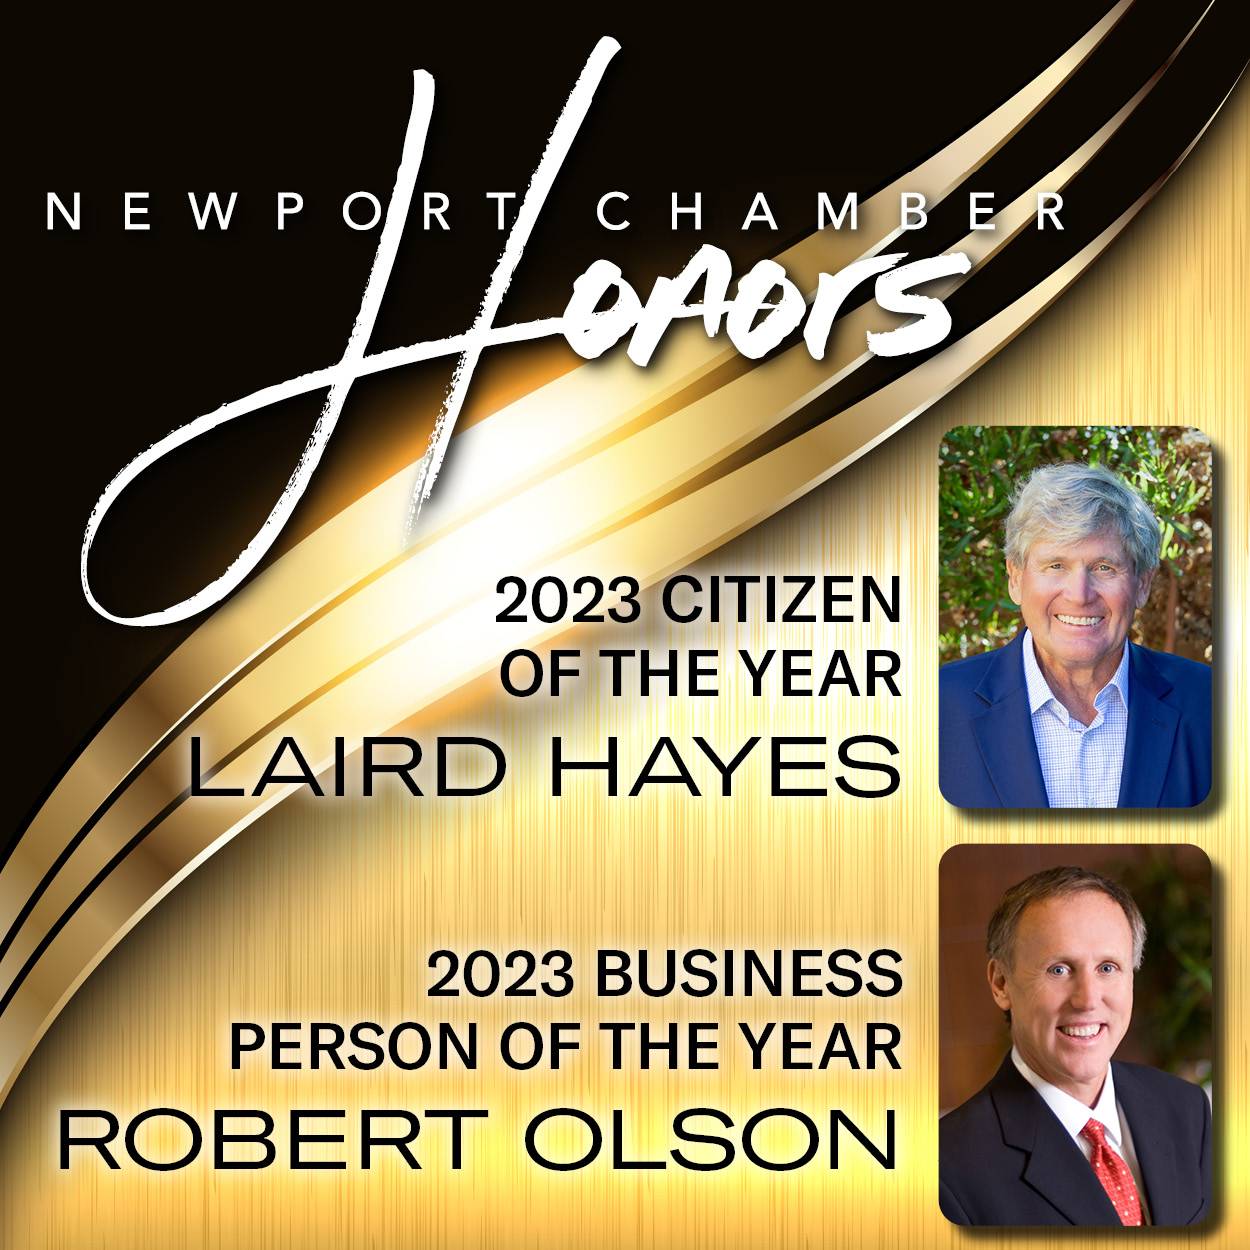 2023 Newport Chamber Honors - Citizen of the Year LAIRD HAYES and Business Person of the Year ROBERT OLSON